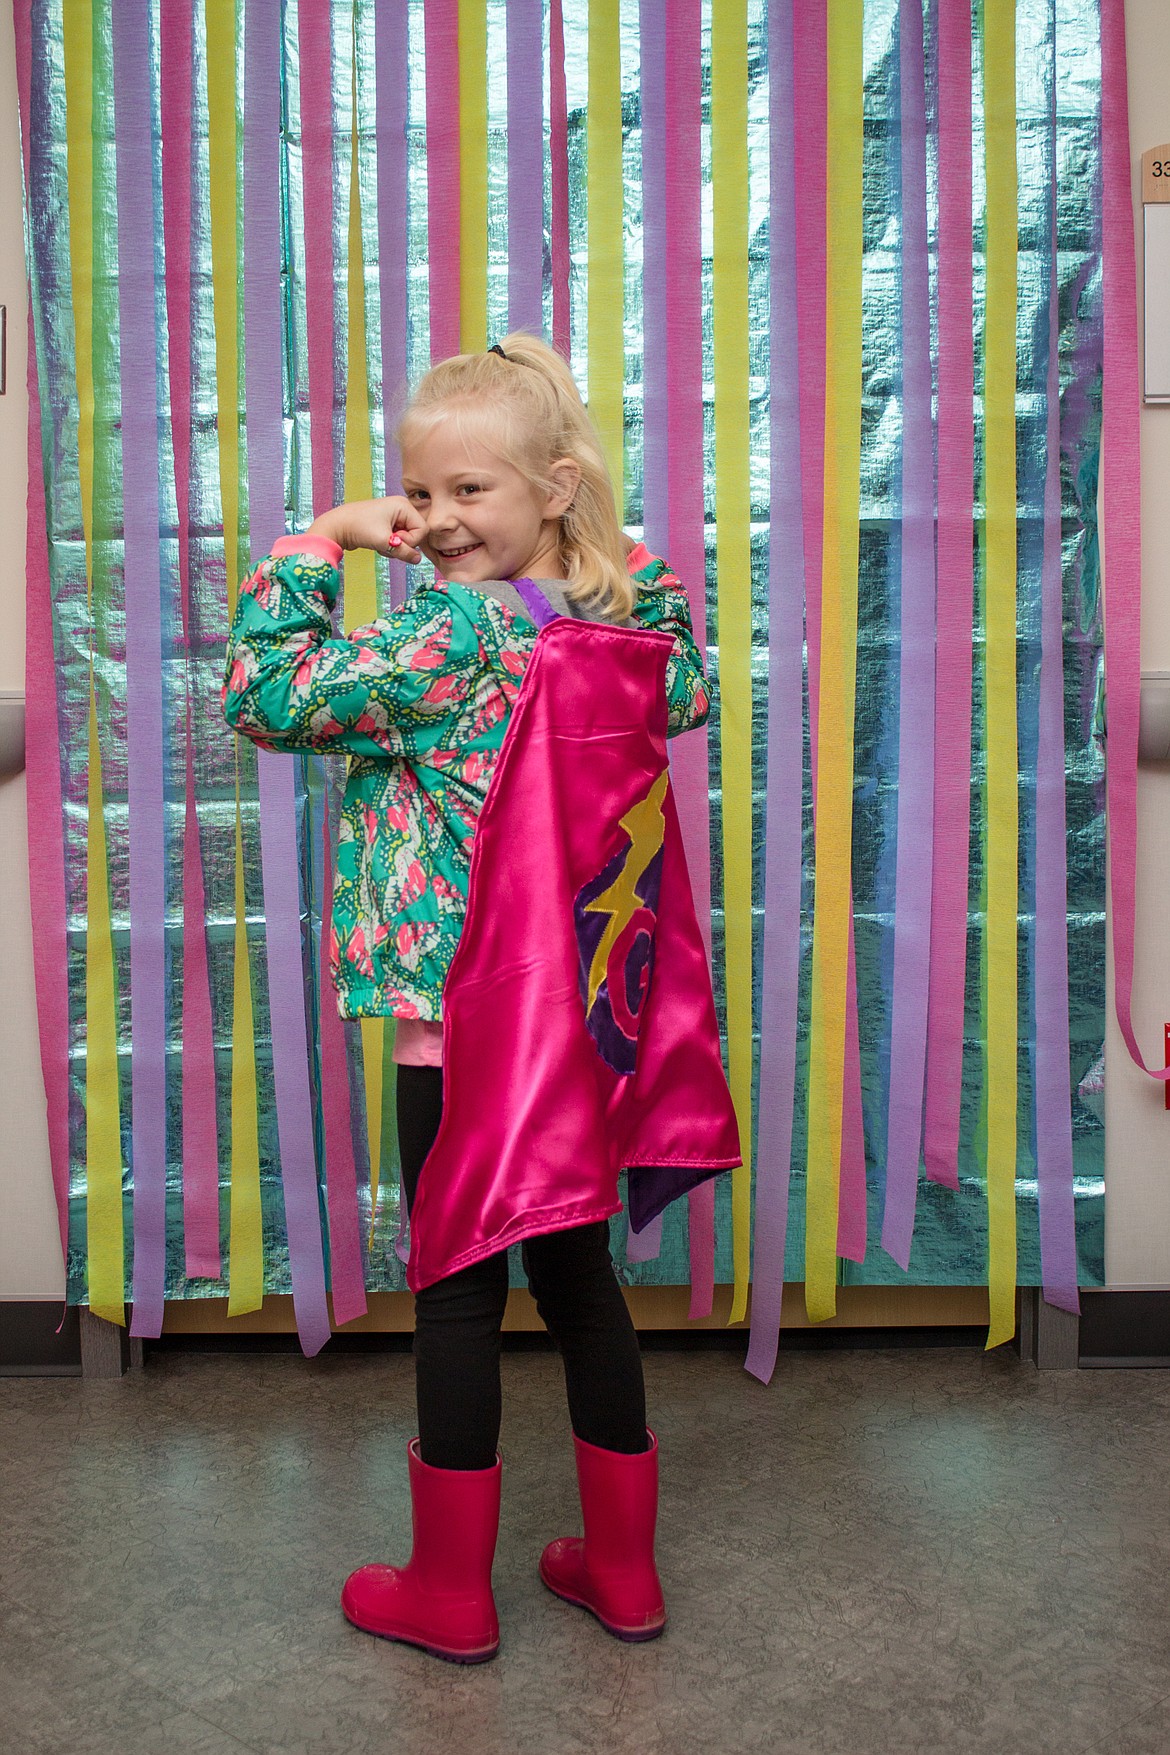 Gemma Farrell, 6, shows how strong she is Wednesday after her final IV treatment at Kootenai Health for systemic juvenile rheumatoid arthritis, a rare condition that affects her joints. (ANDREA NAGEL/Kootenai Health)